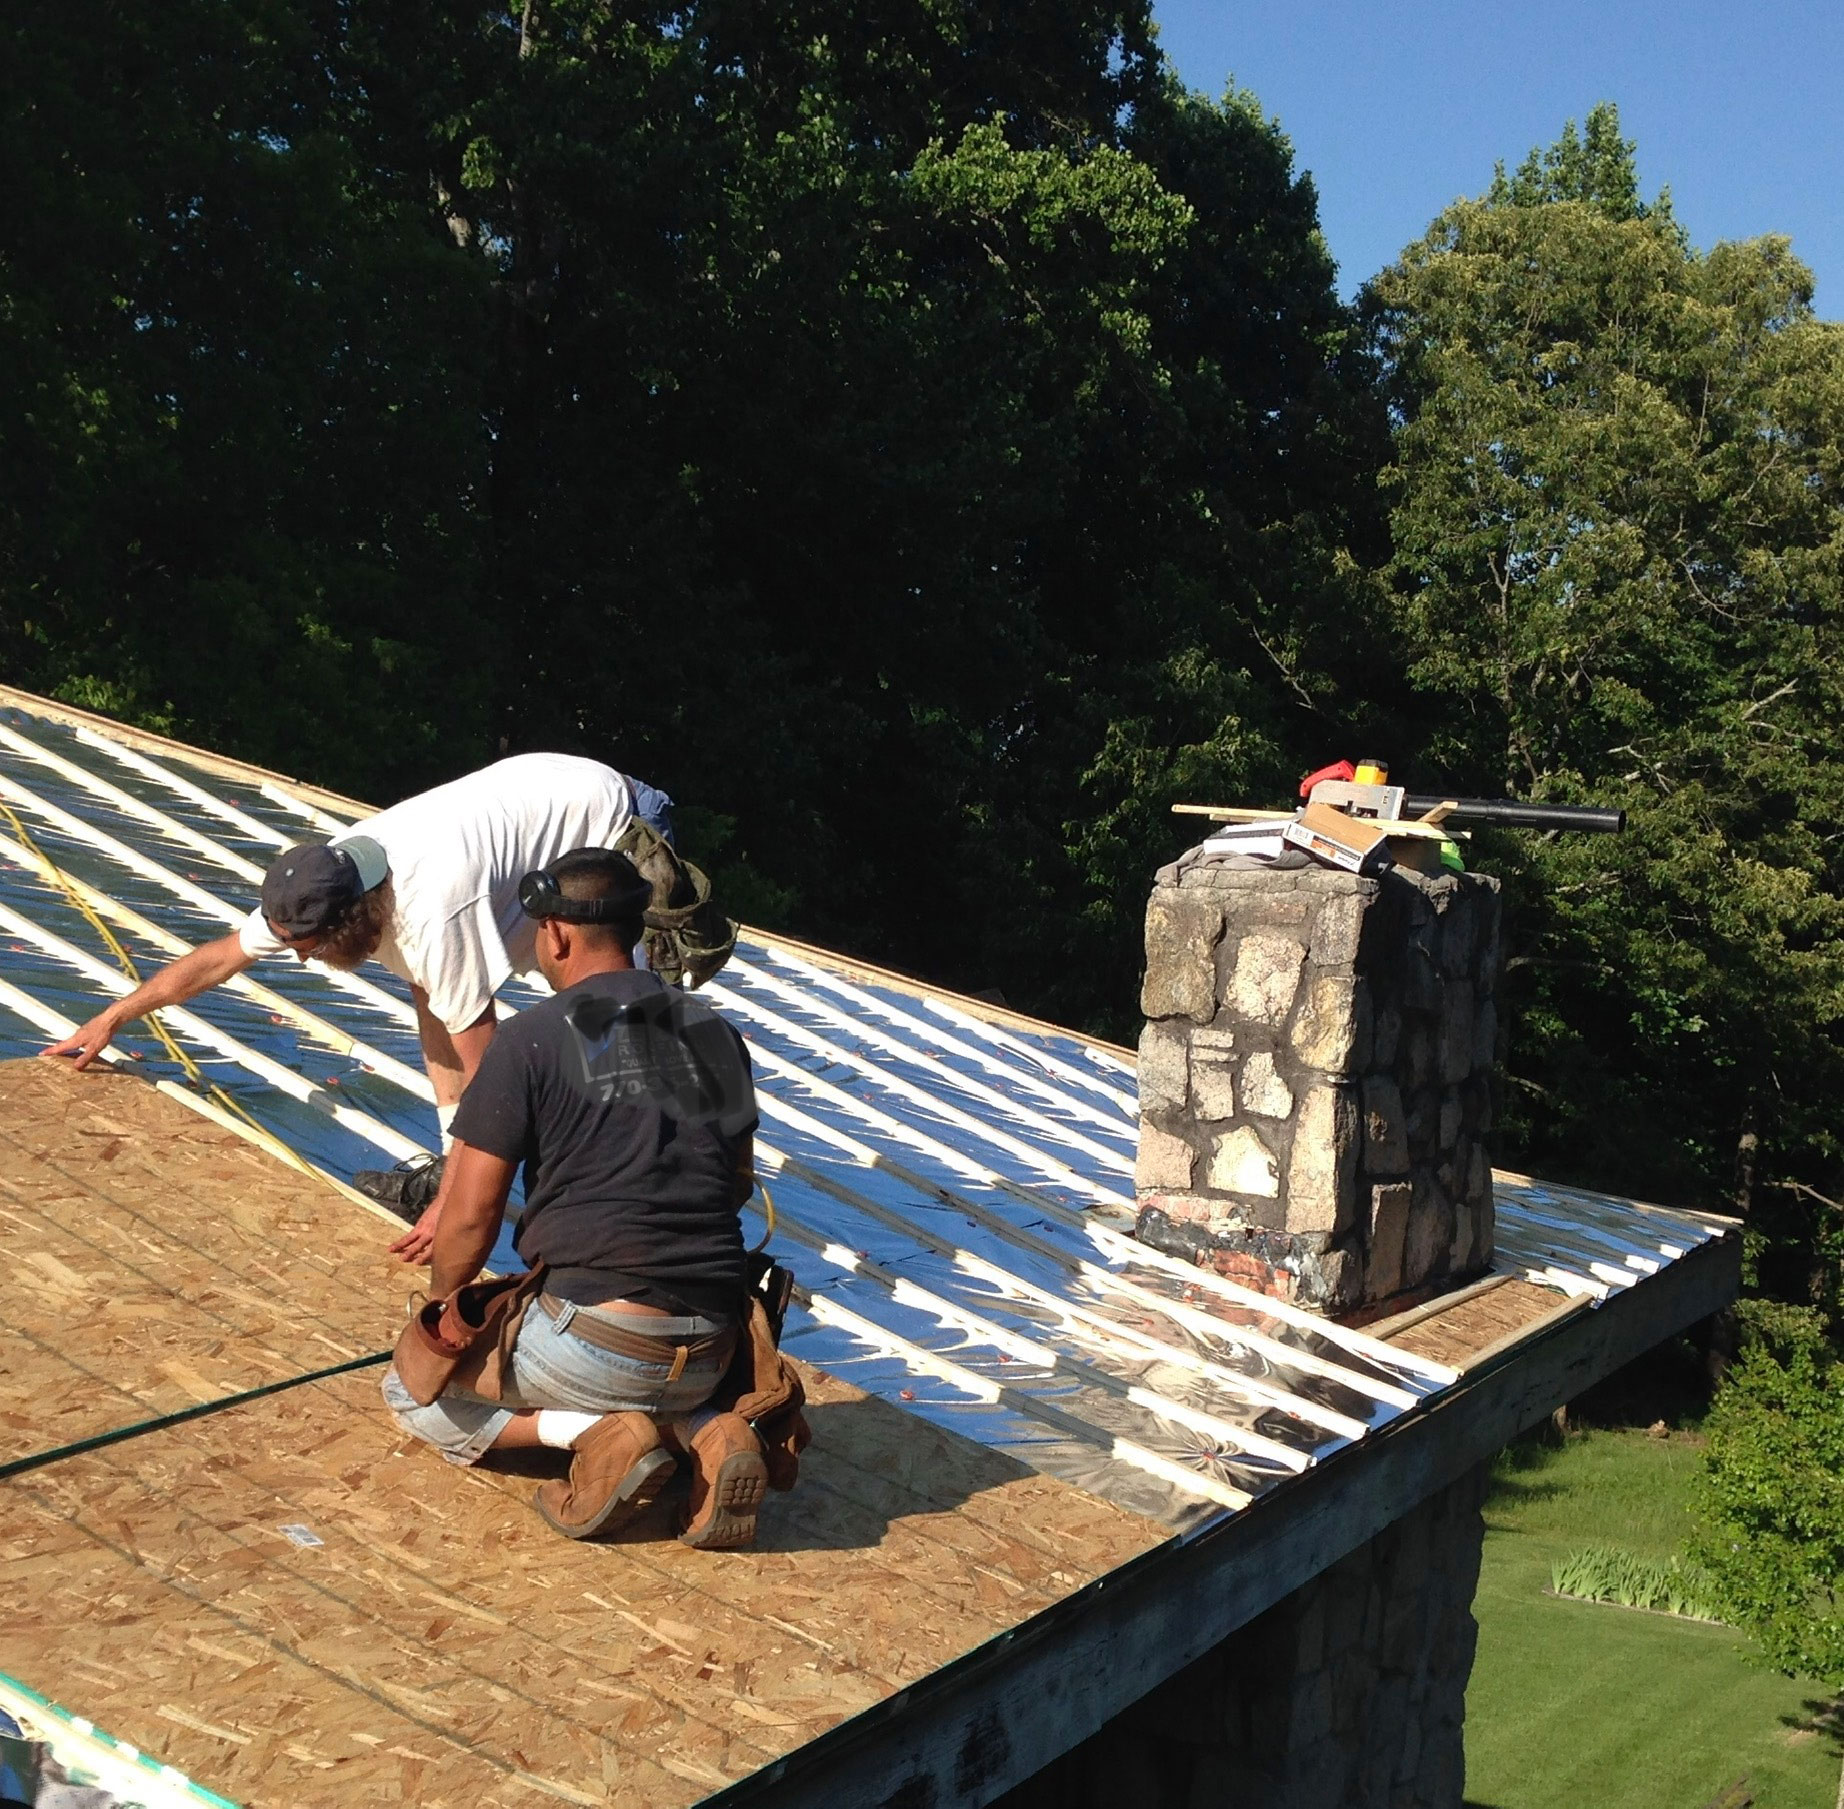 Working on a Radiant Roof